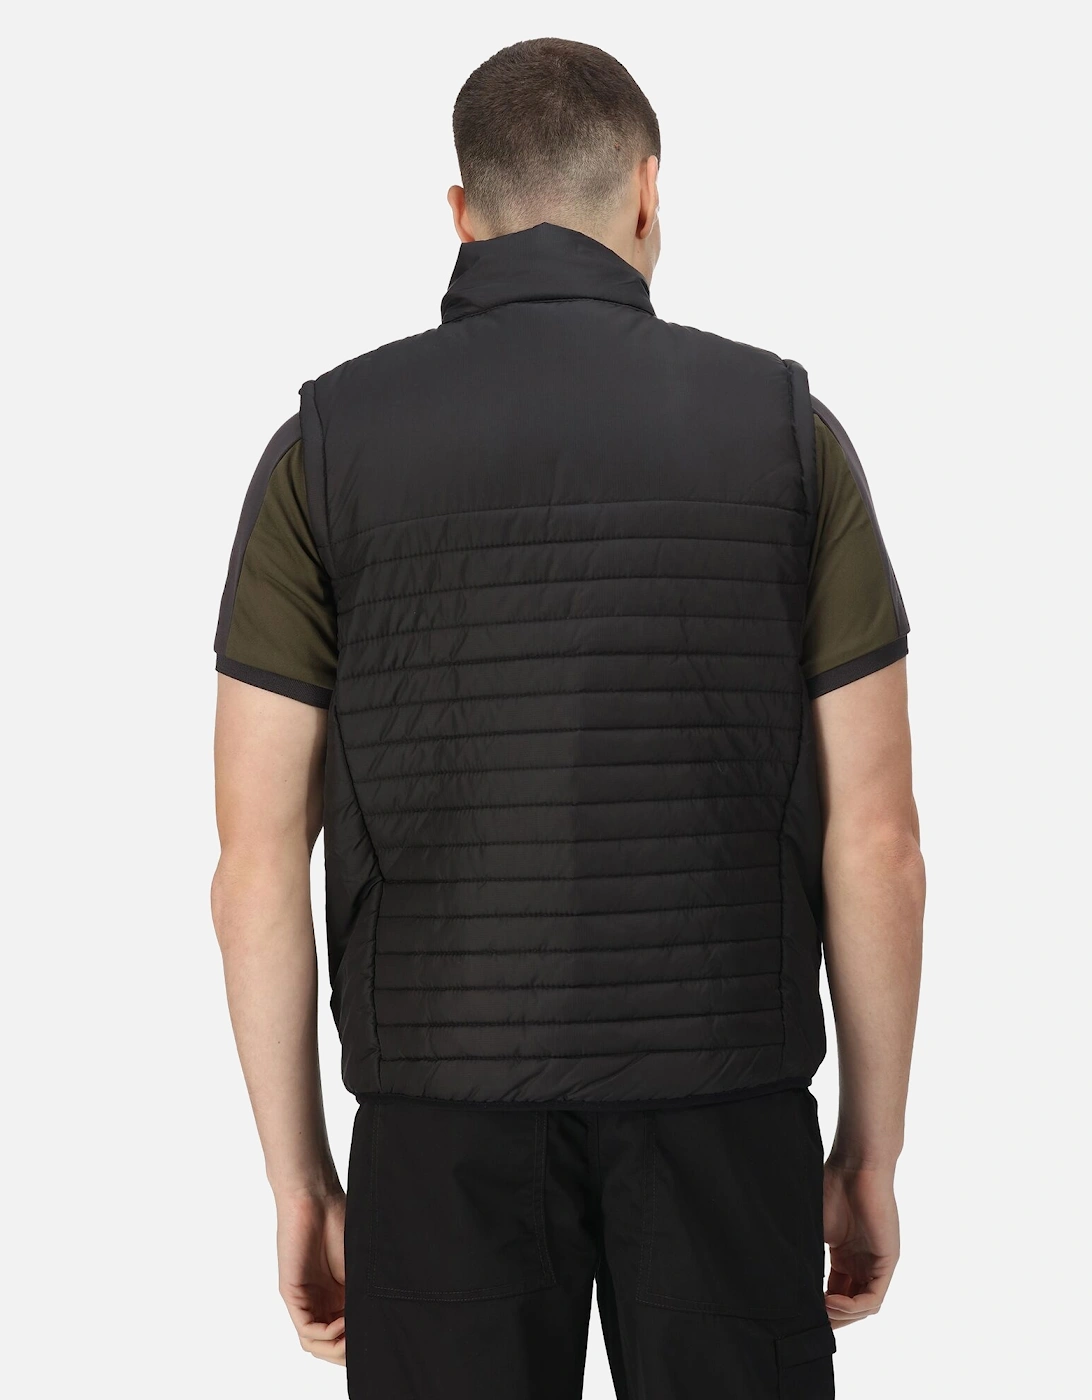 Mens Honestly Made Insulated Recycled Gilet